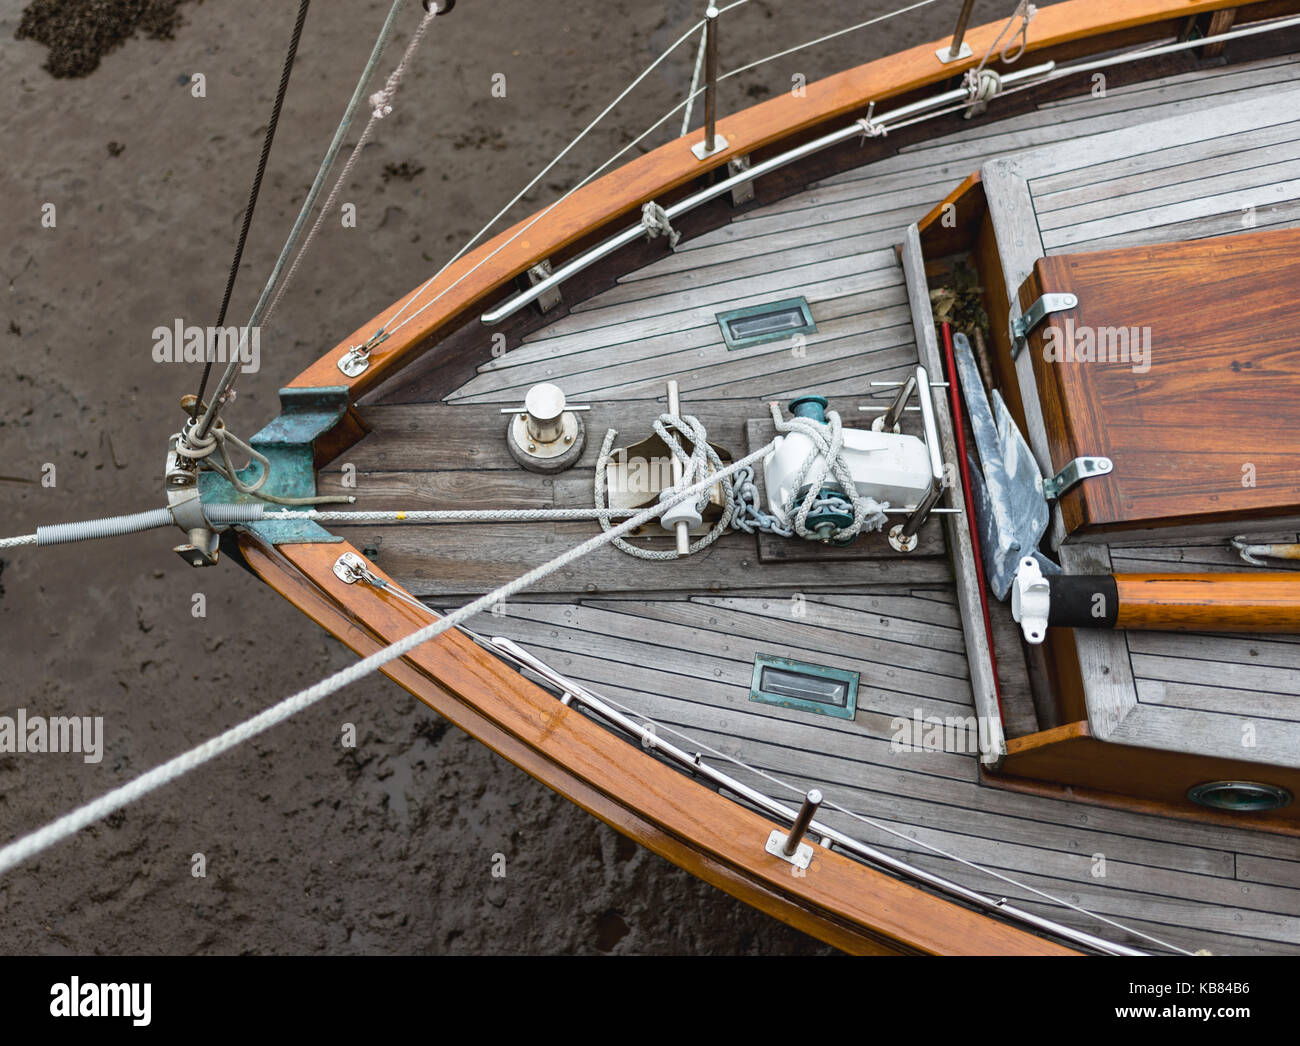 Wooden Yacht, view from above Stock Photo